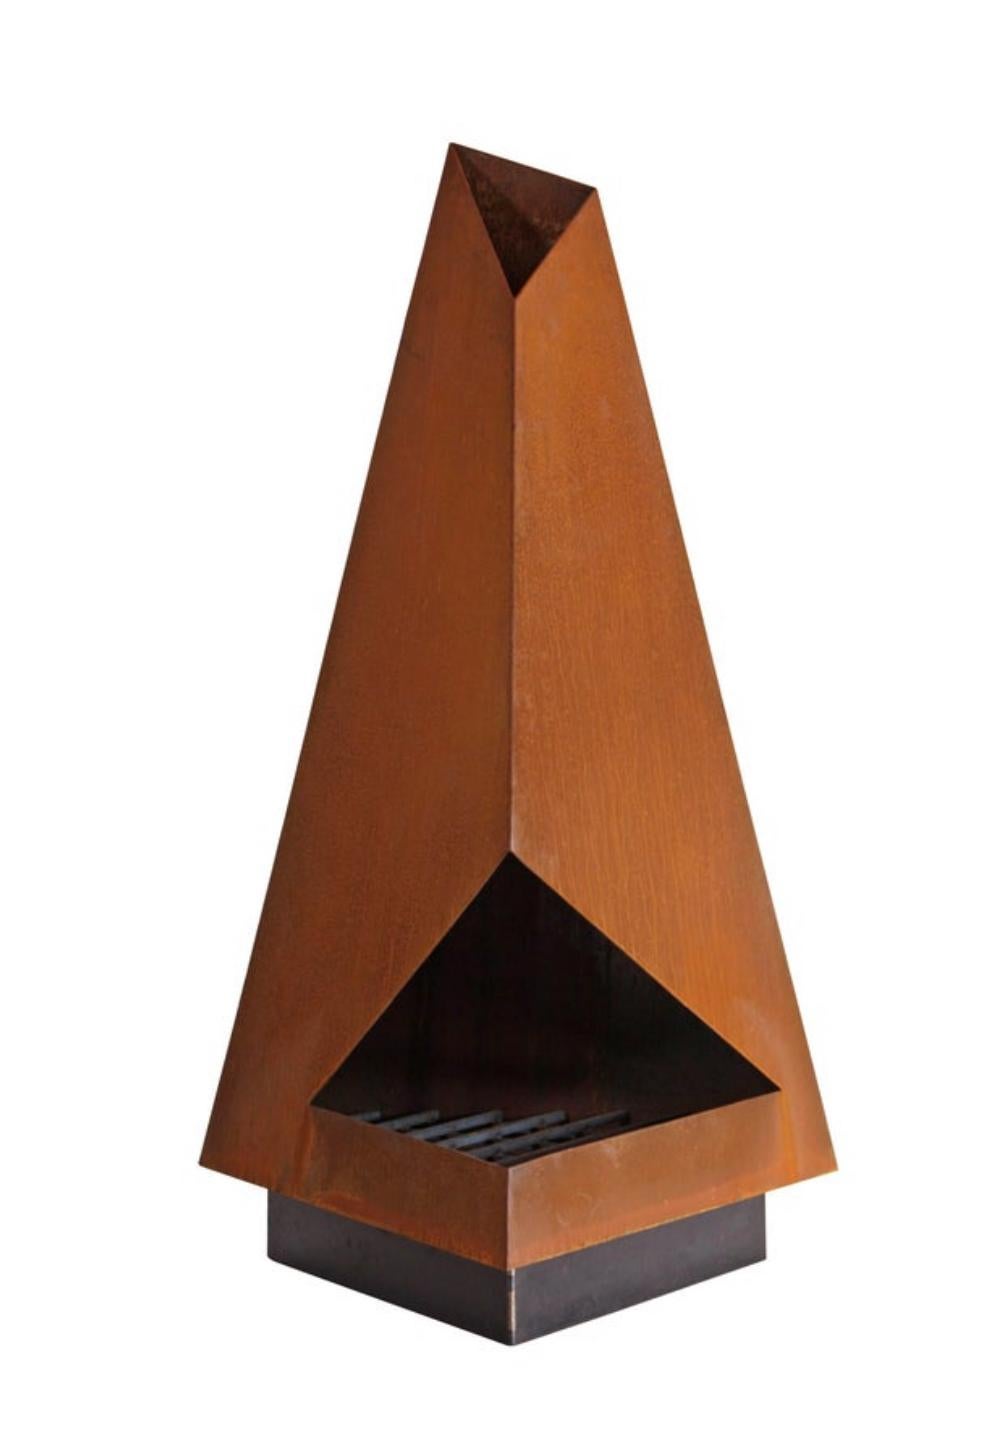 Steel Fire Pit Chiminea Outdoor Fireplace by Koby Knoll Click For Sale 5